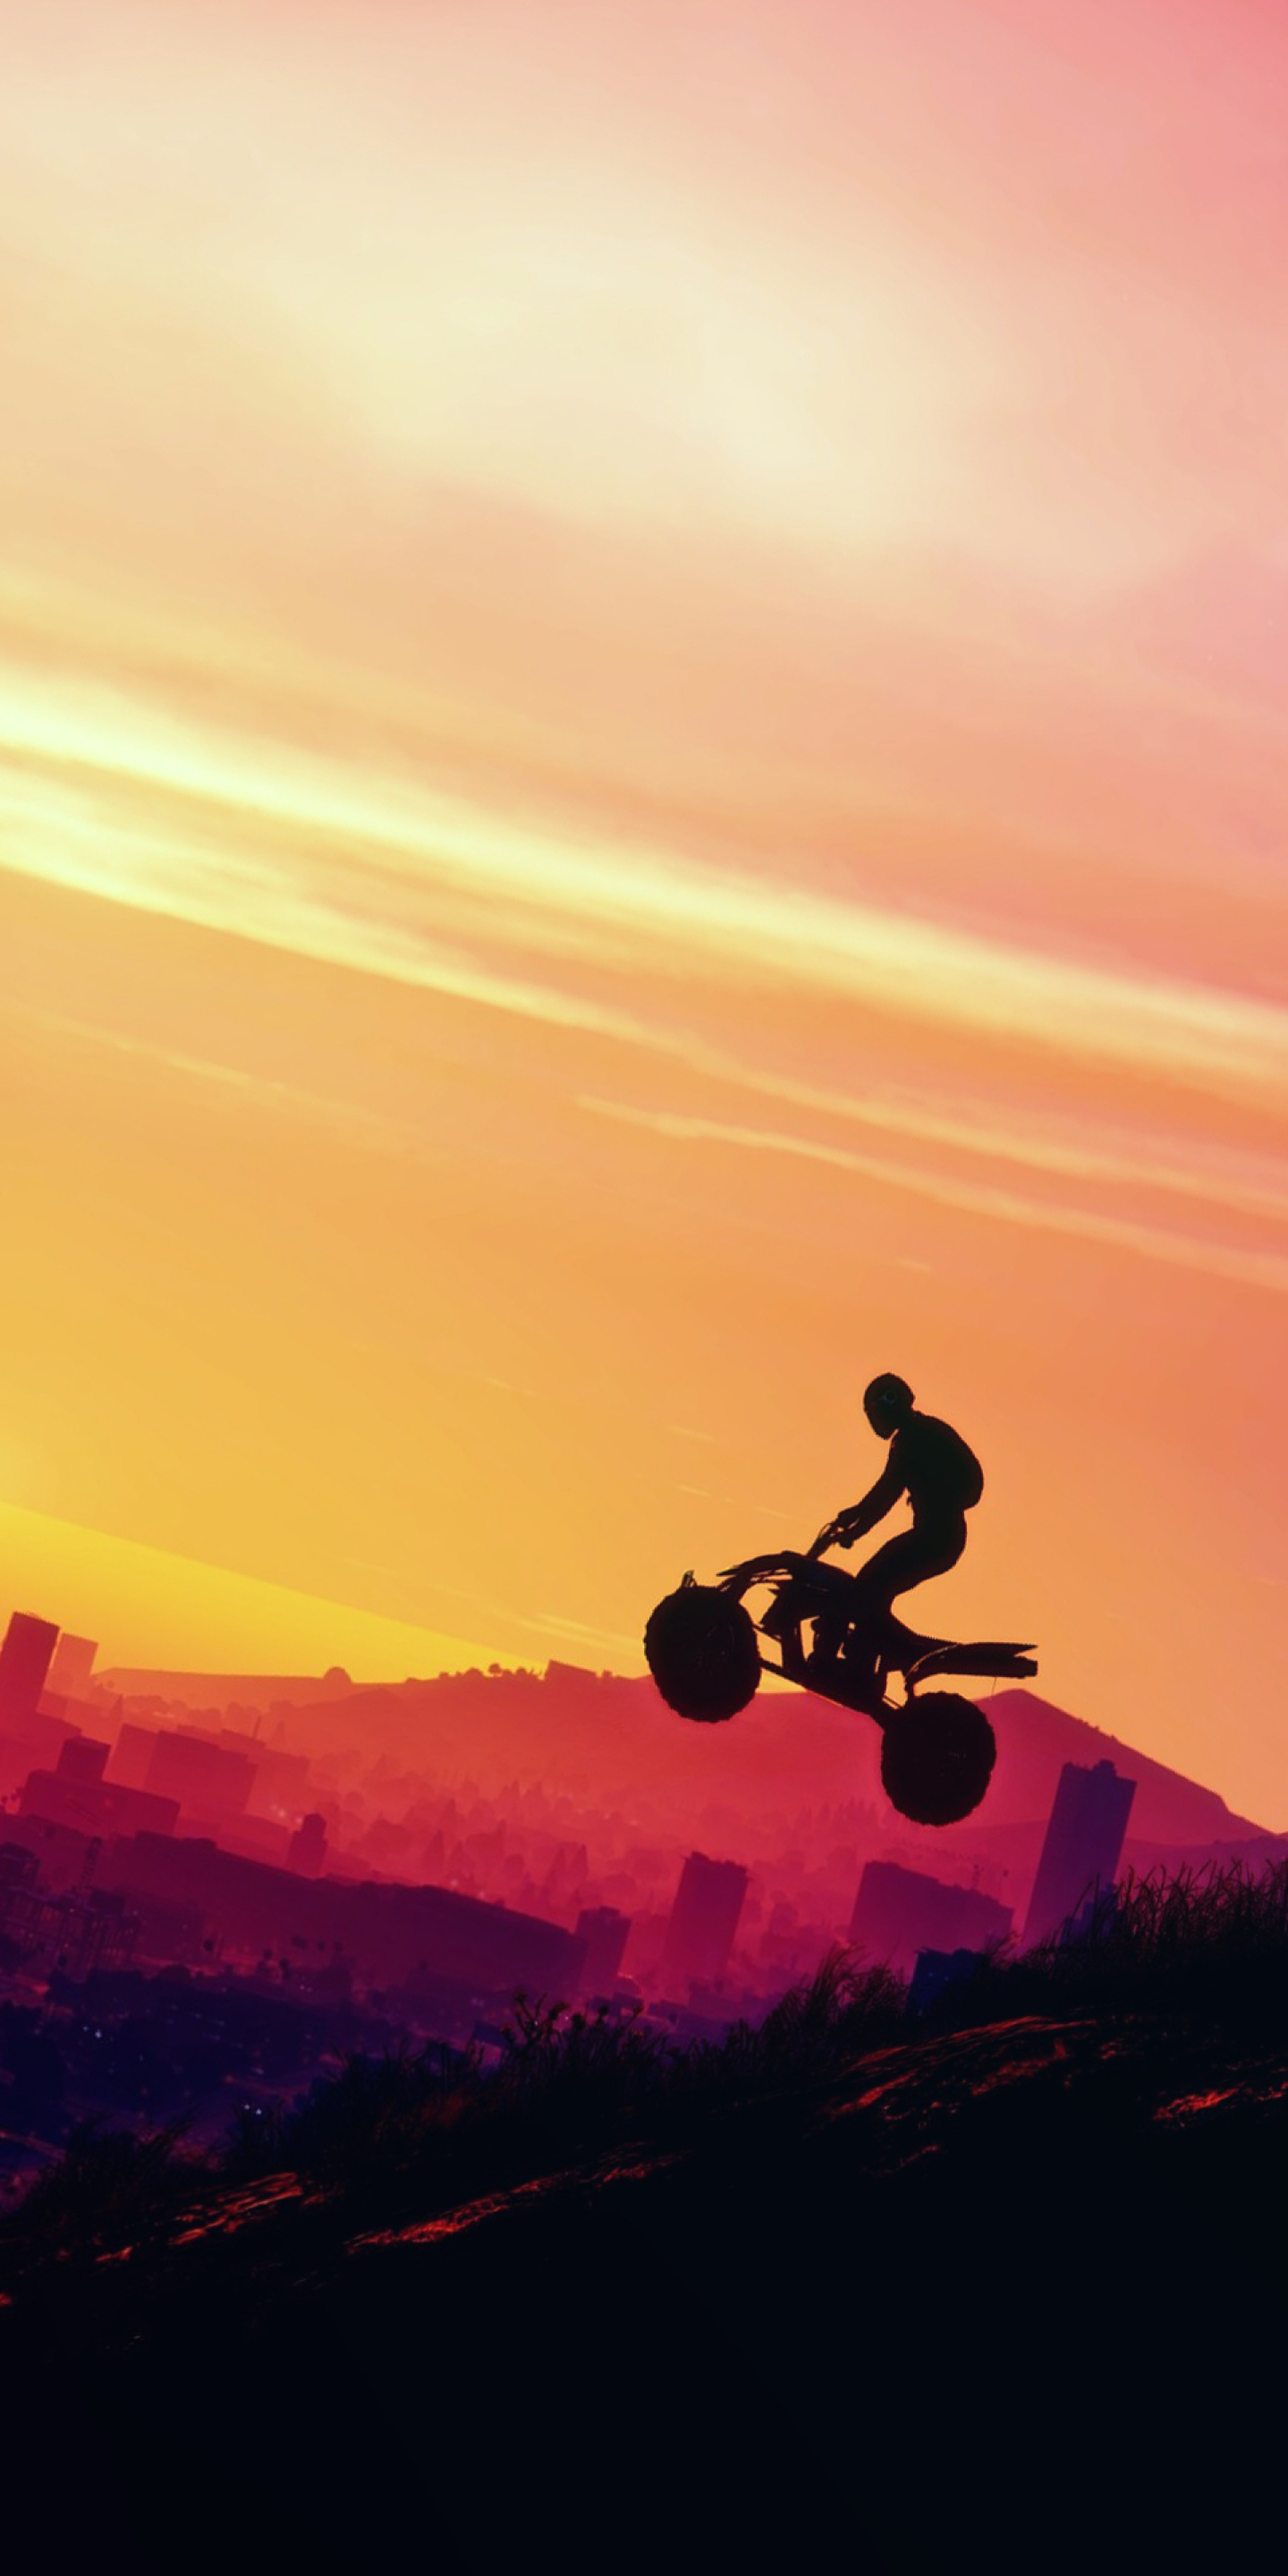 grand theft auto v wallpapers